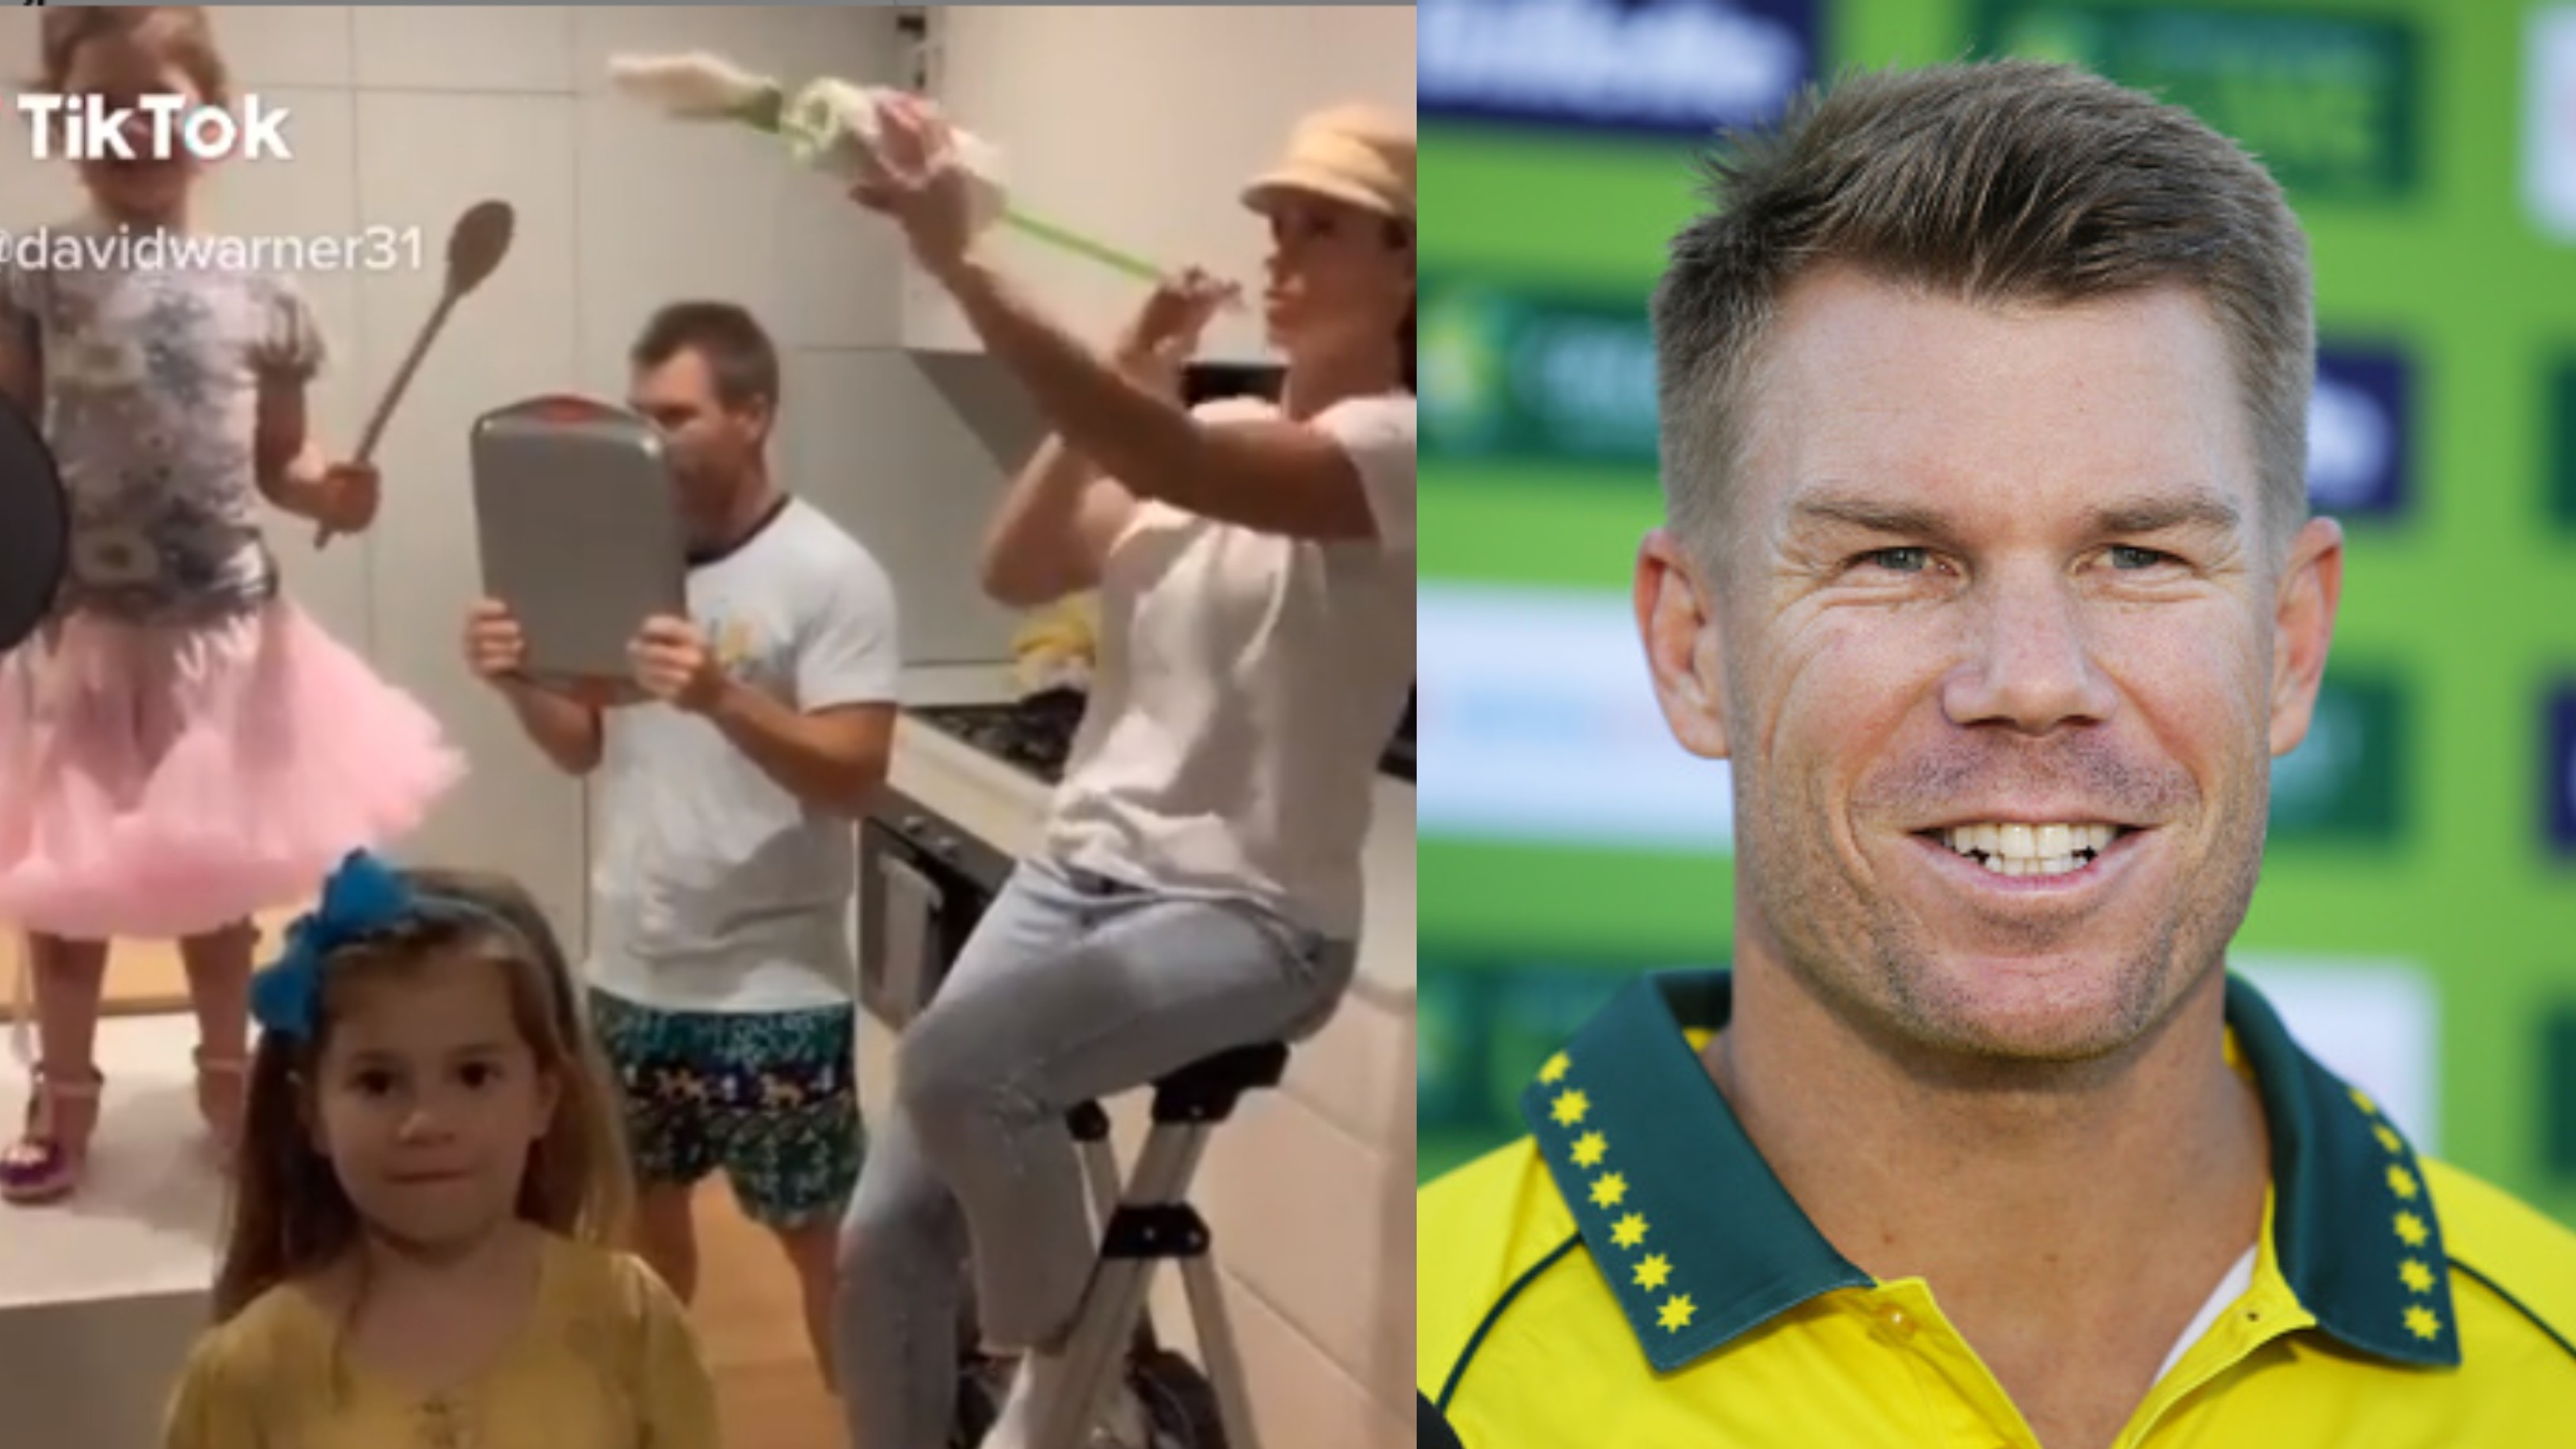 WATCH - David Warner shares a musical rendition in his latest TikTok video